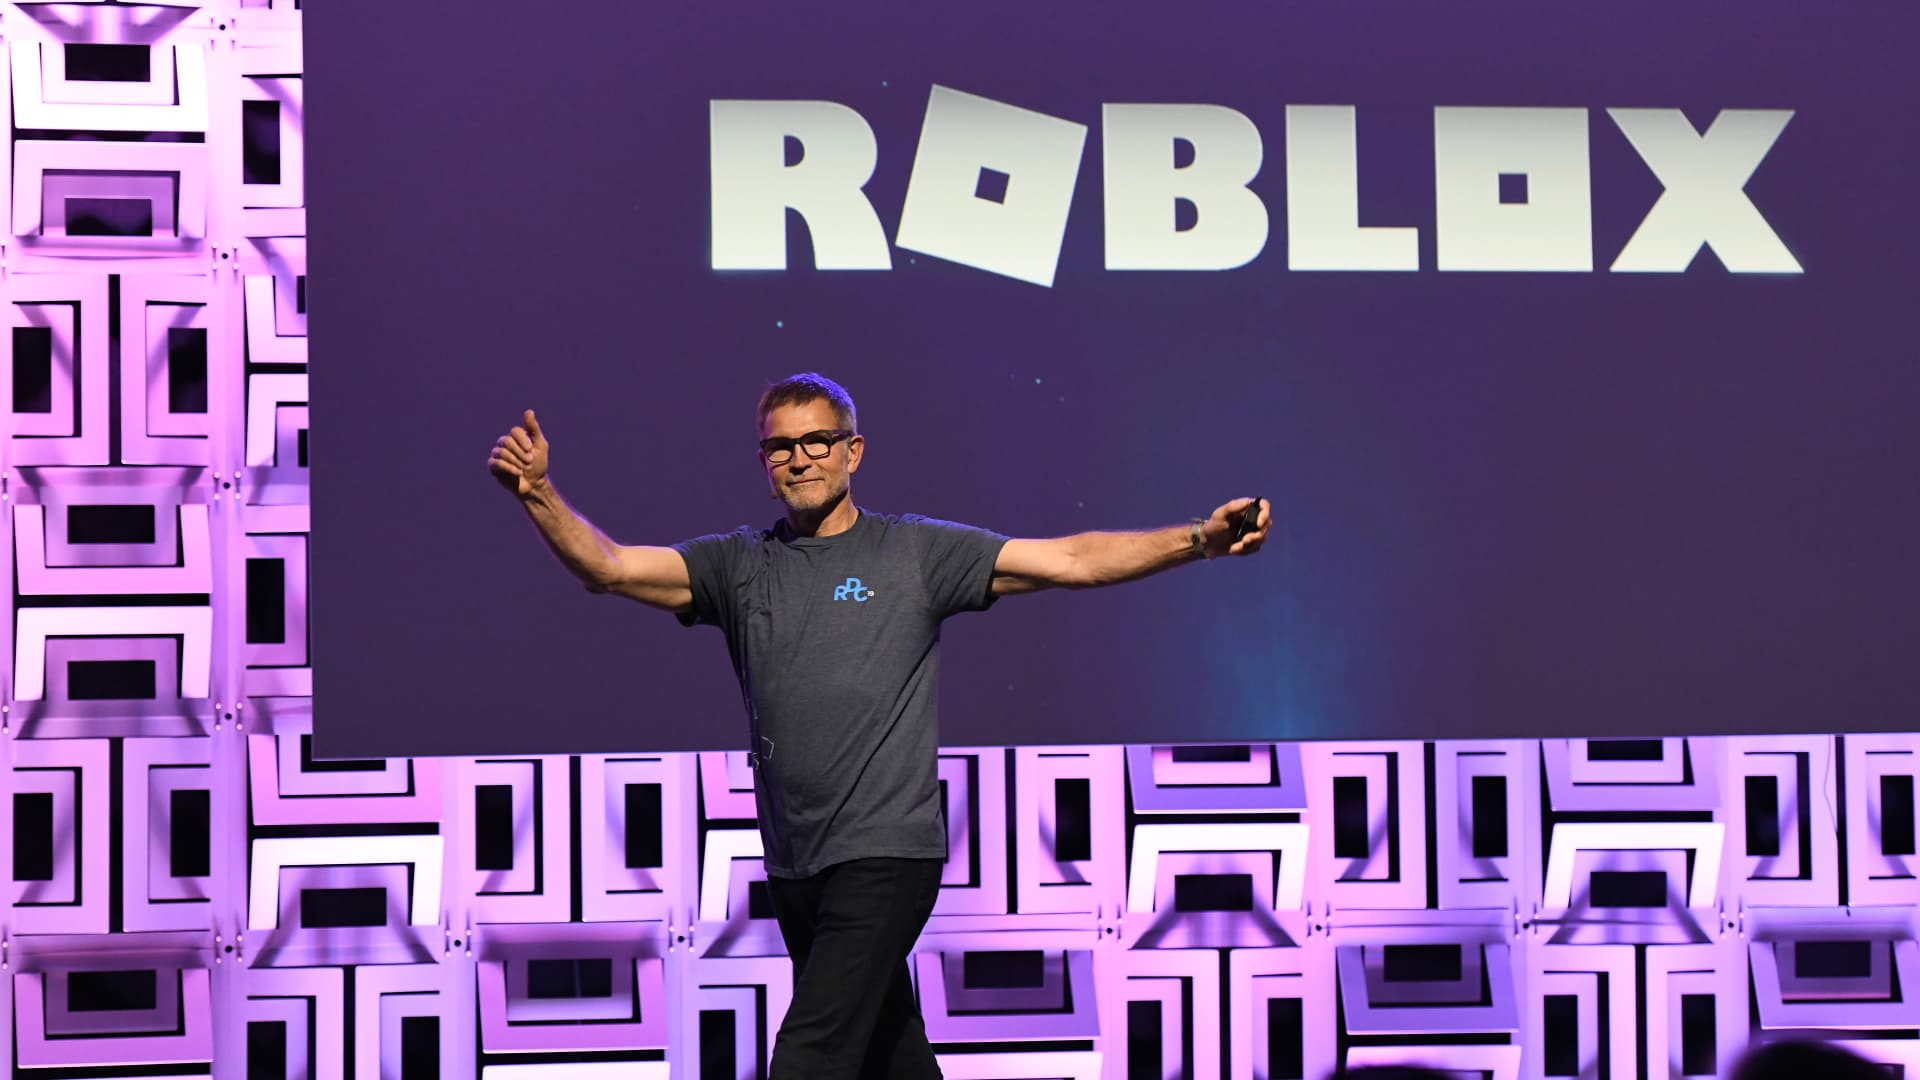 Roblox is letting game creators sell 3D virtual goods as it looks for ways to boost revenue